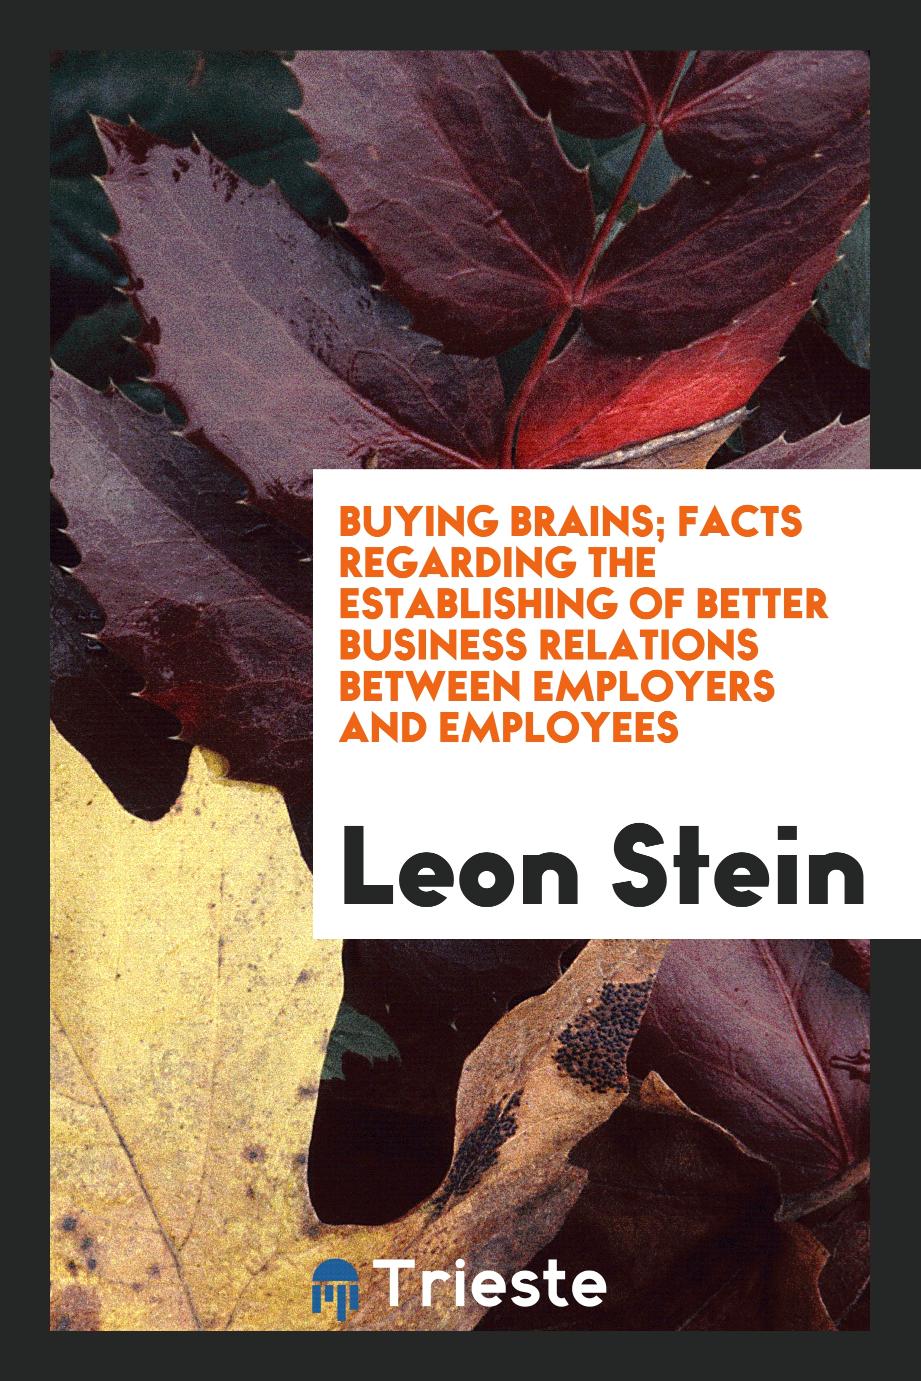 Buying brains; facts regarding the establishing of better business relations between employers and employees